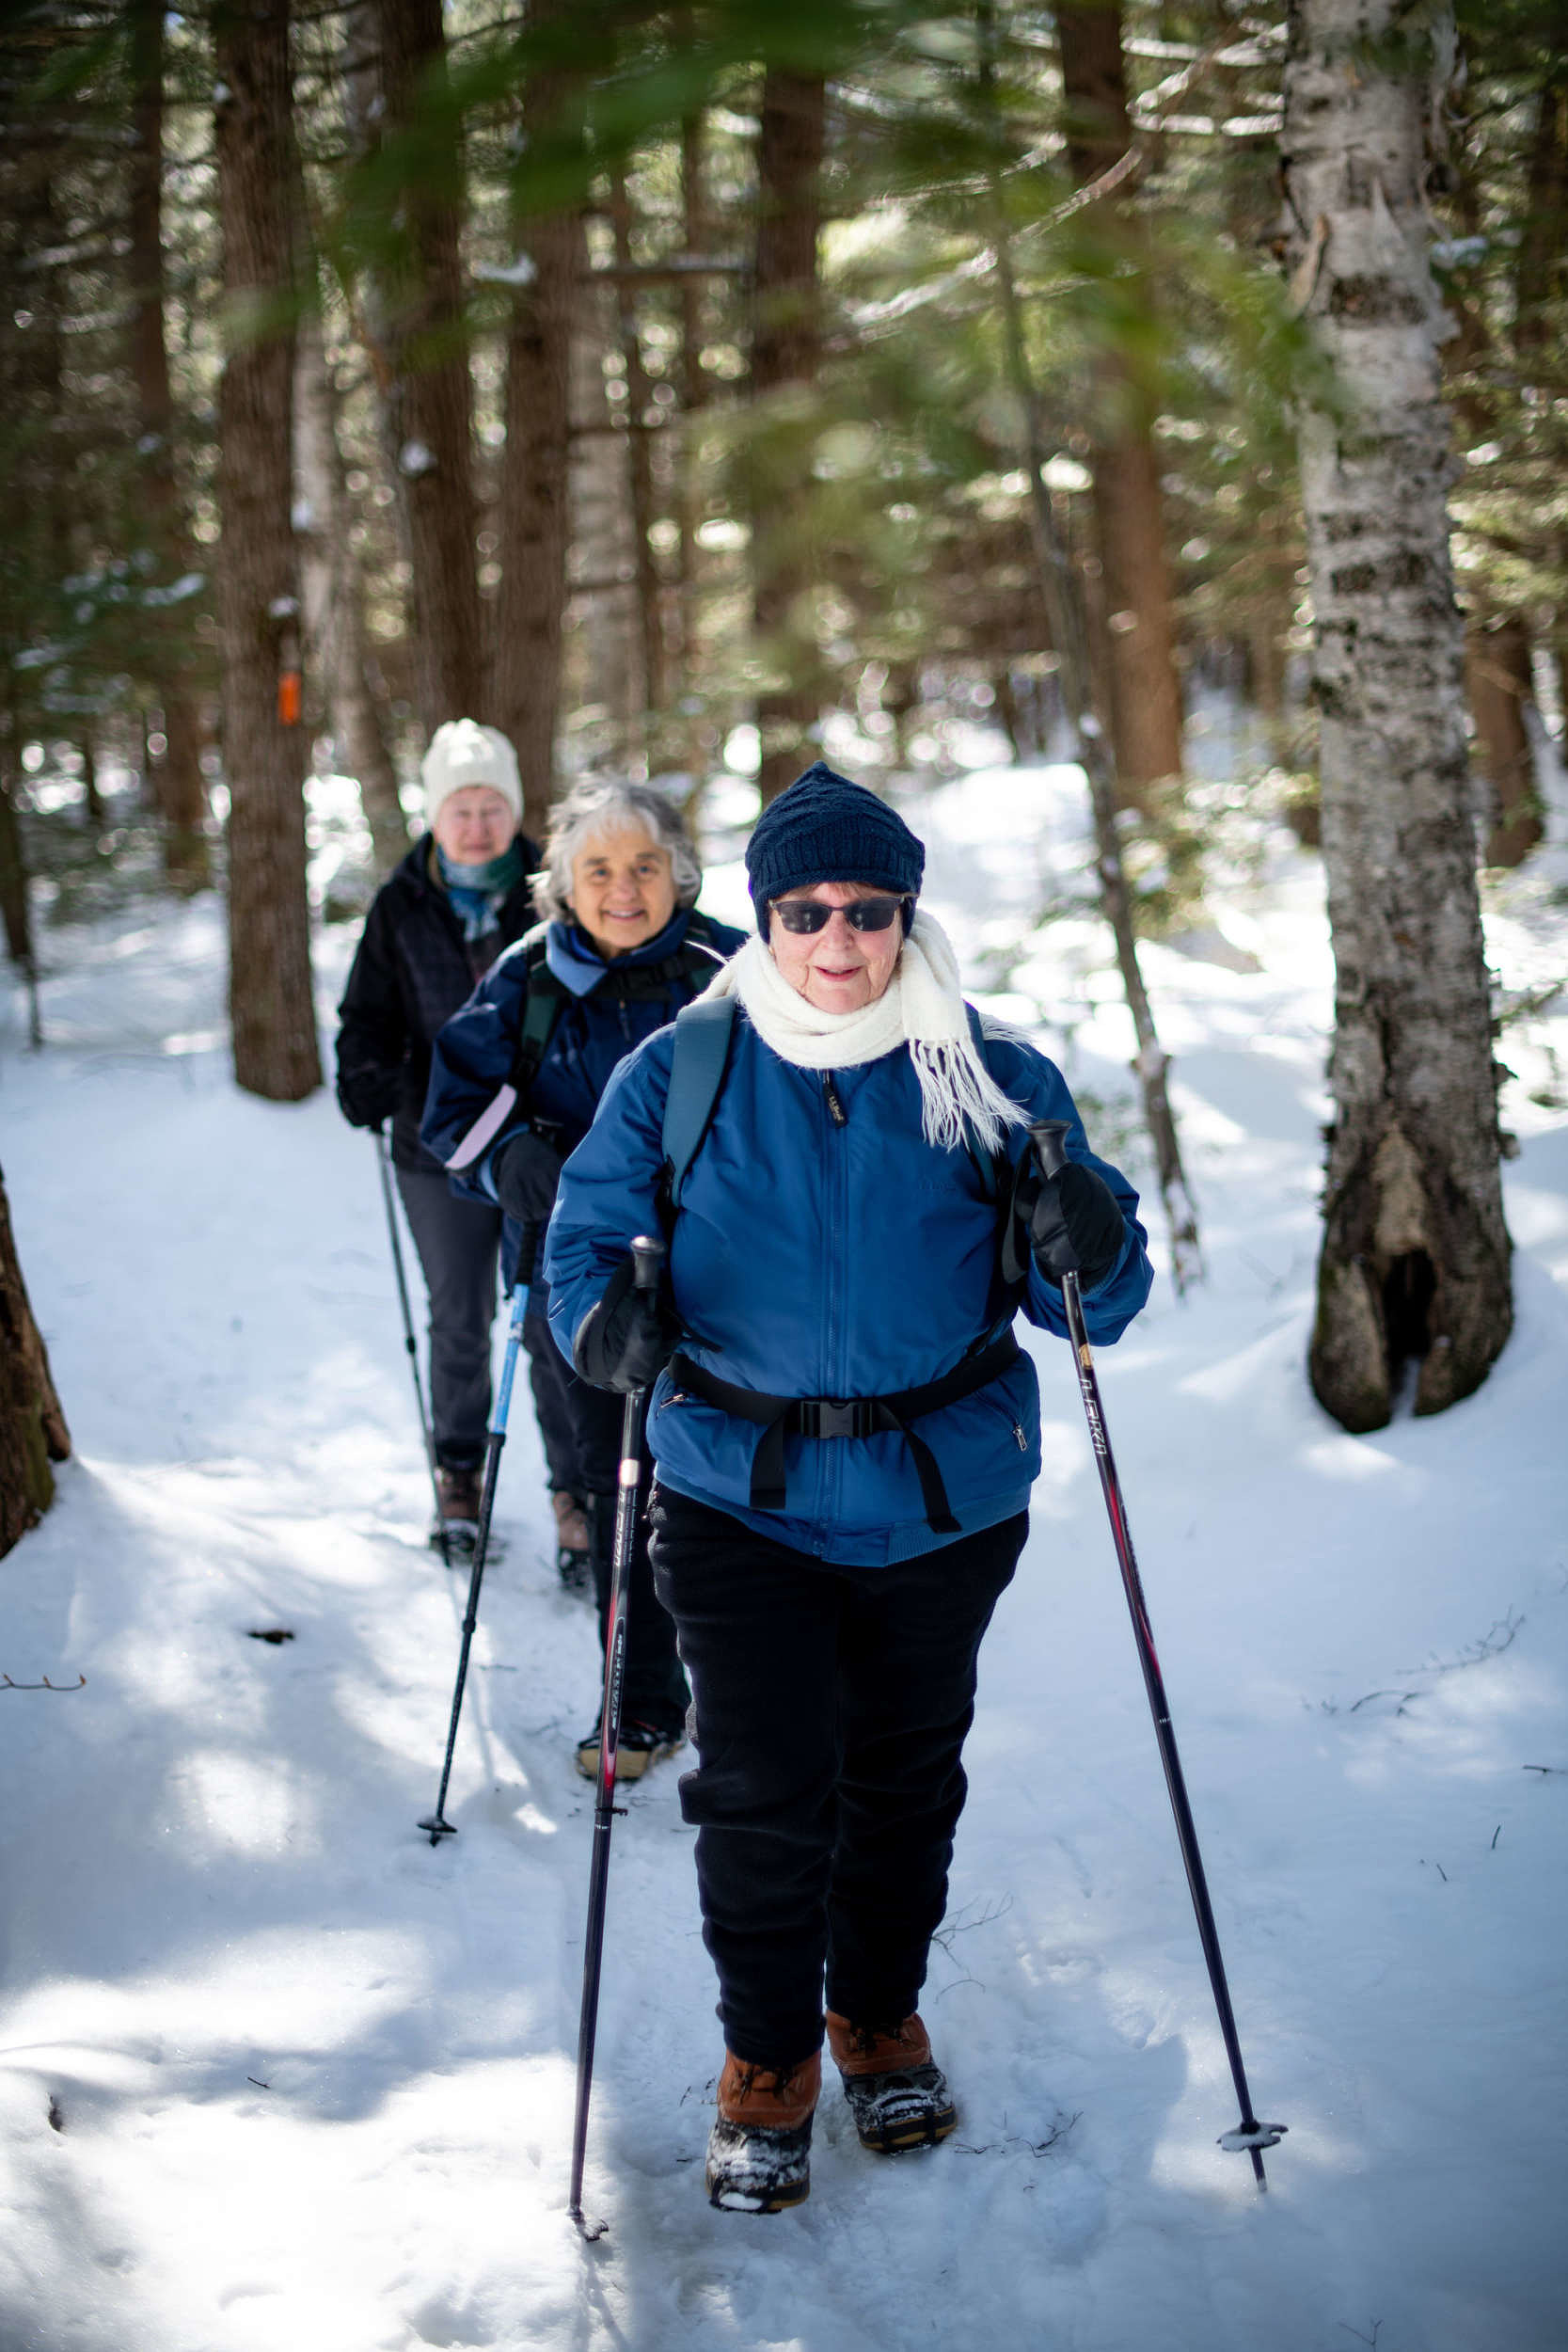 Winter hikers on the Harris Center's Hiroshi Loop Trail. (photo © Ben Conant)